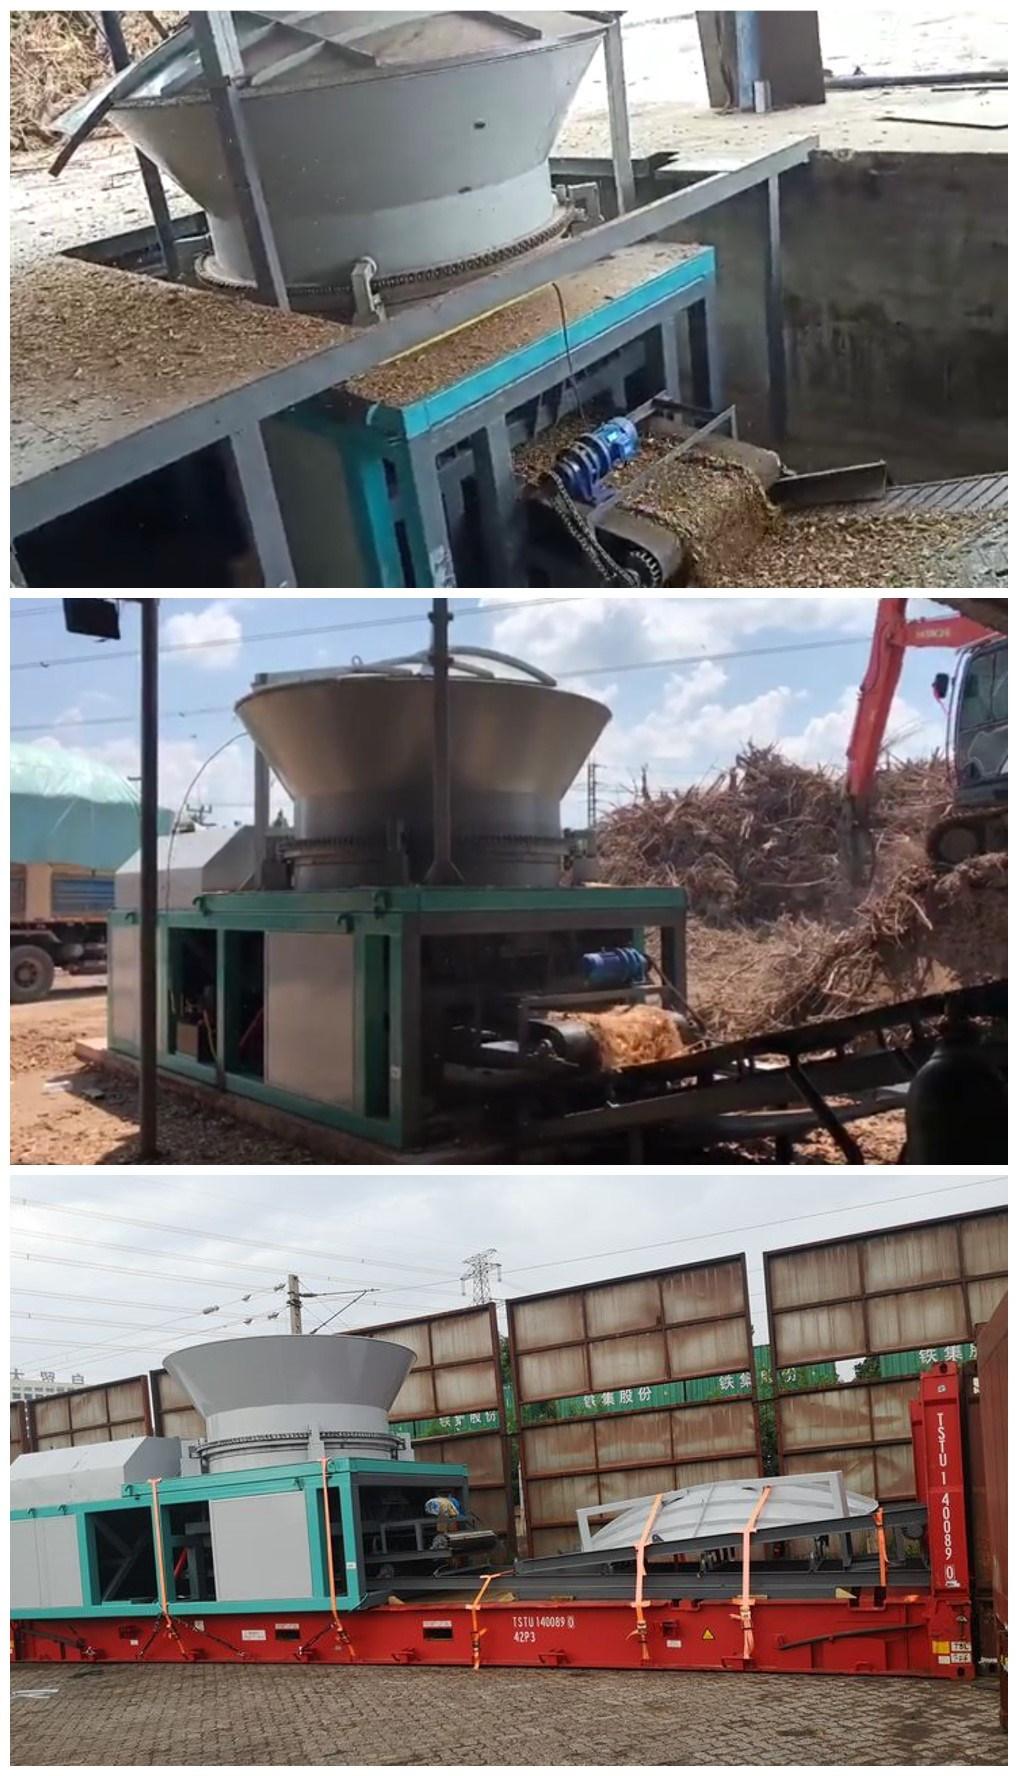 Shd Forest Disc Wood Crusher Machine with Large Capacity 20-30t/H